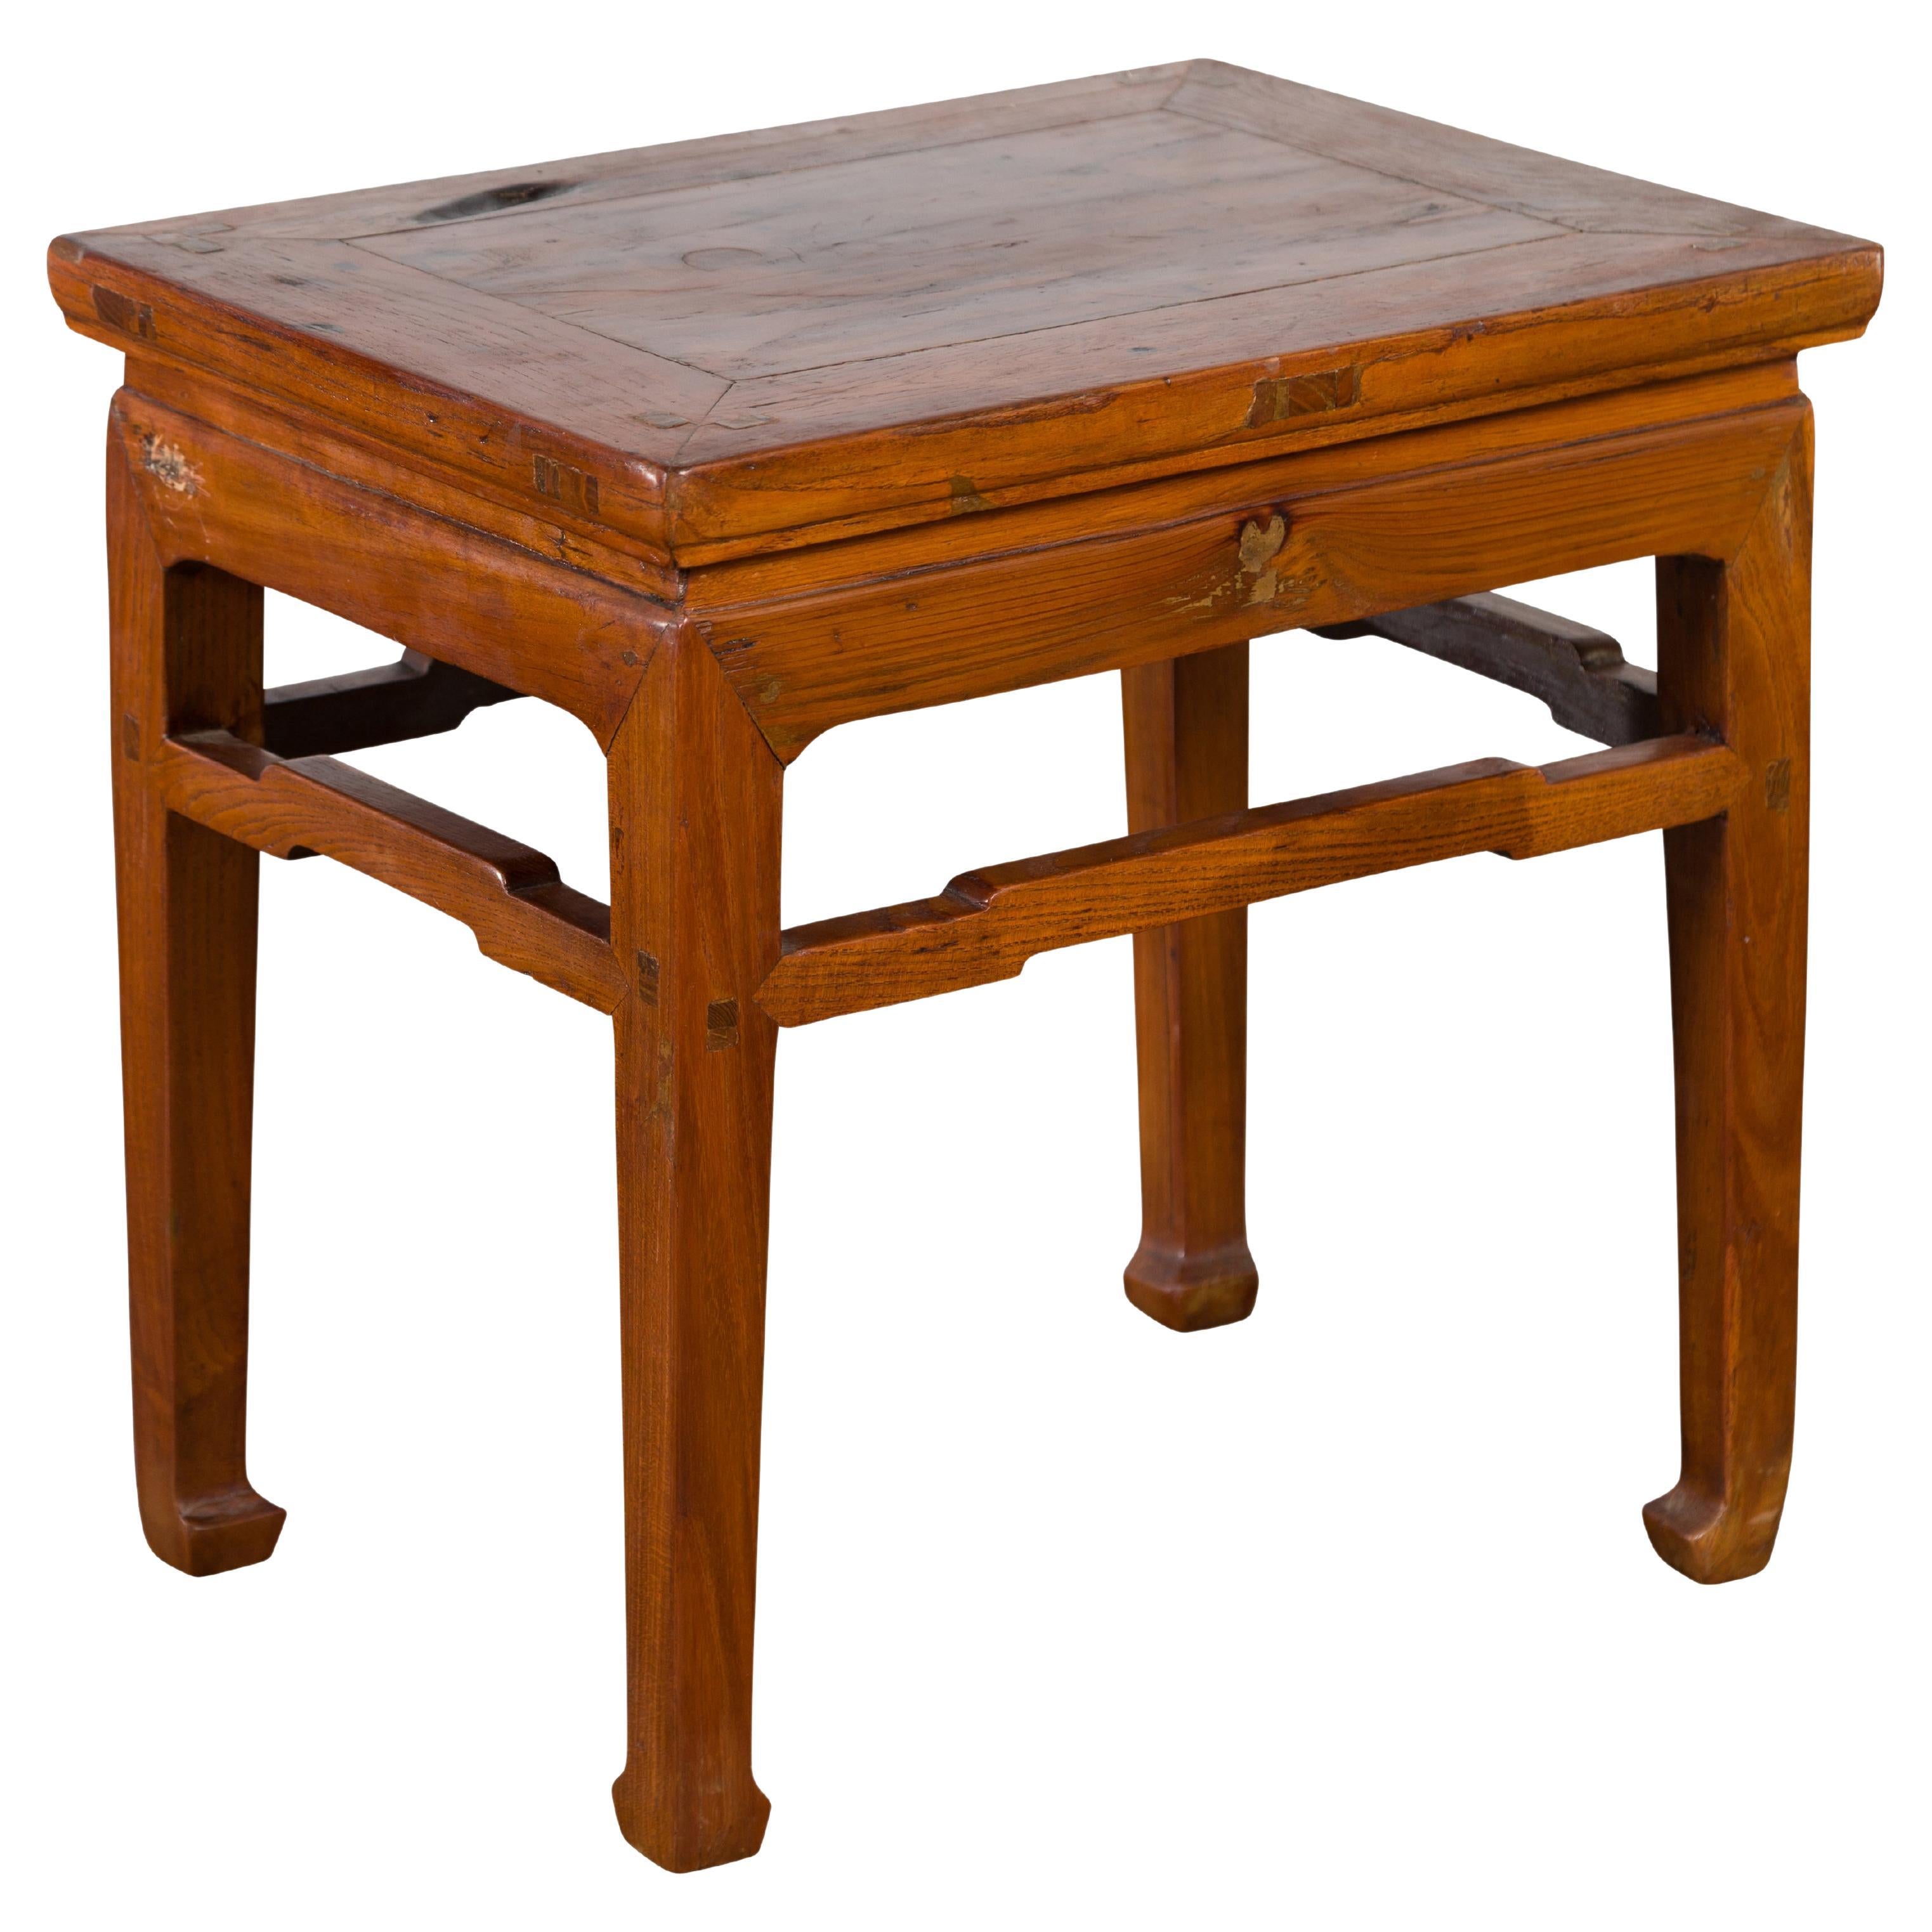 Chinese Qing Dynasty 19th Century Side Table with Humpback Stretchers For Sale